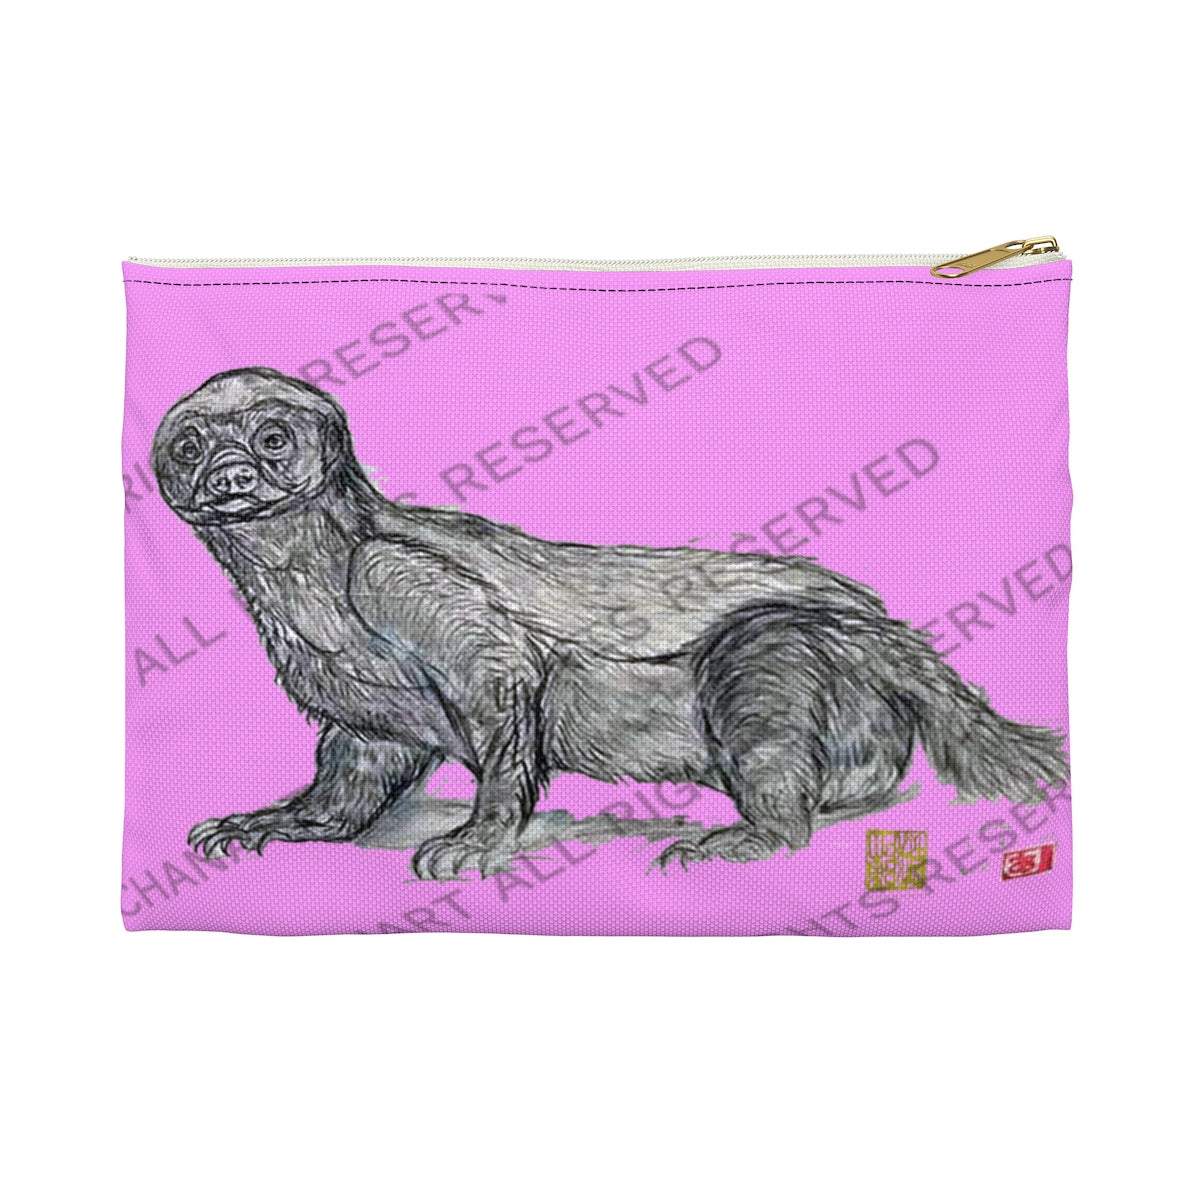 Pink Honey Badger Cute Small 9"x6" Or Large 12"x9" Size Flat Accessory Pouch- Made in USA - alicechanart